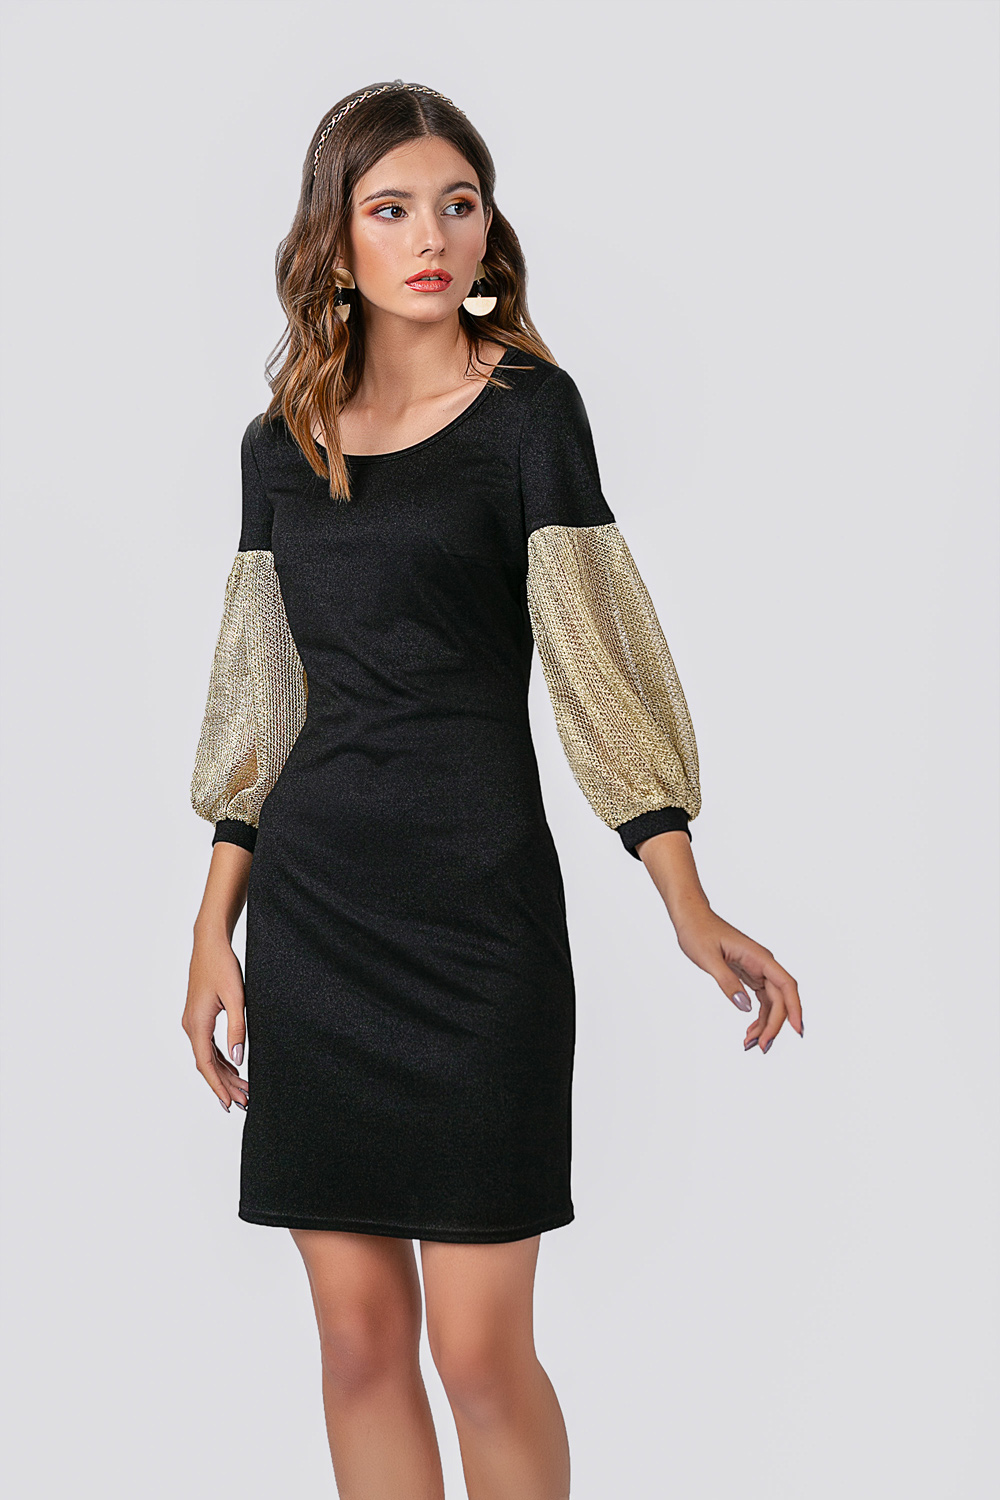 Dress with gold sleeves